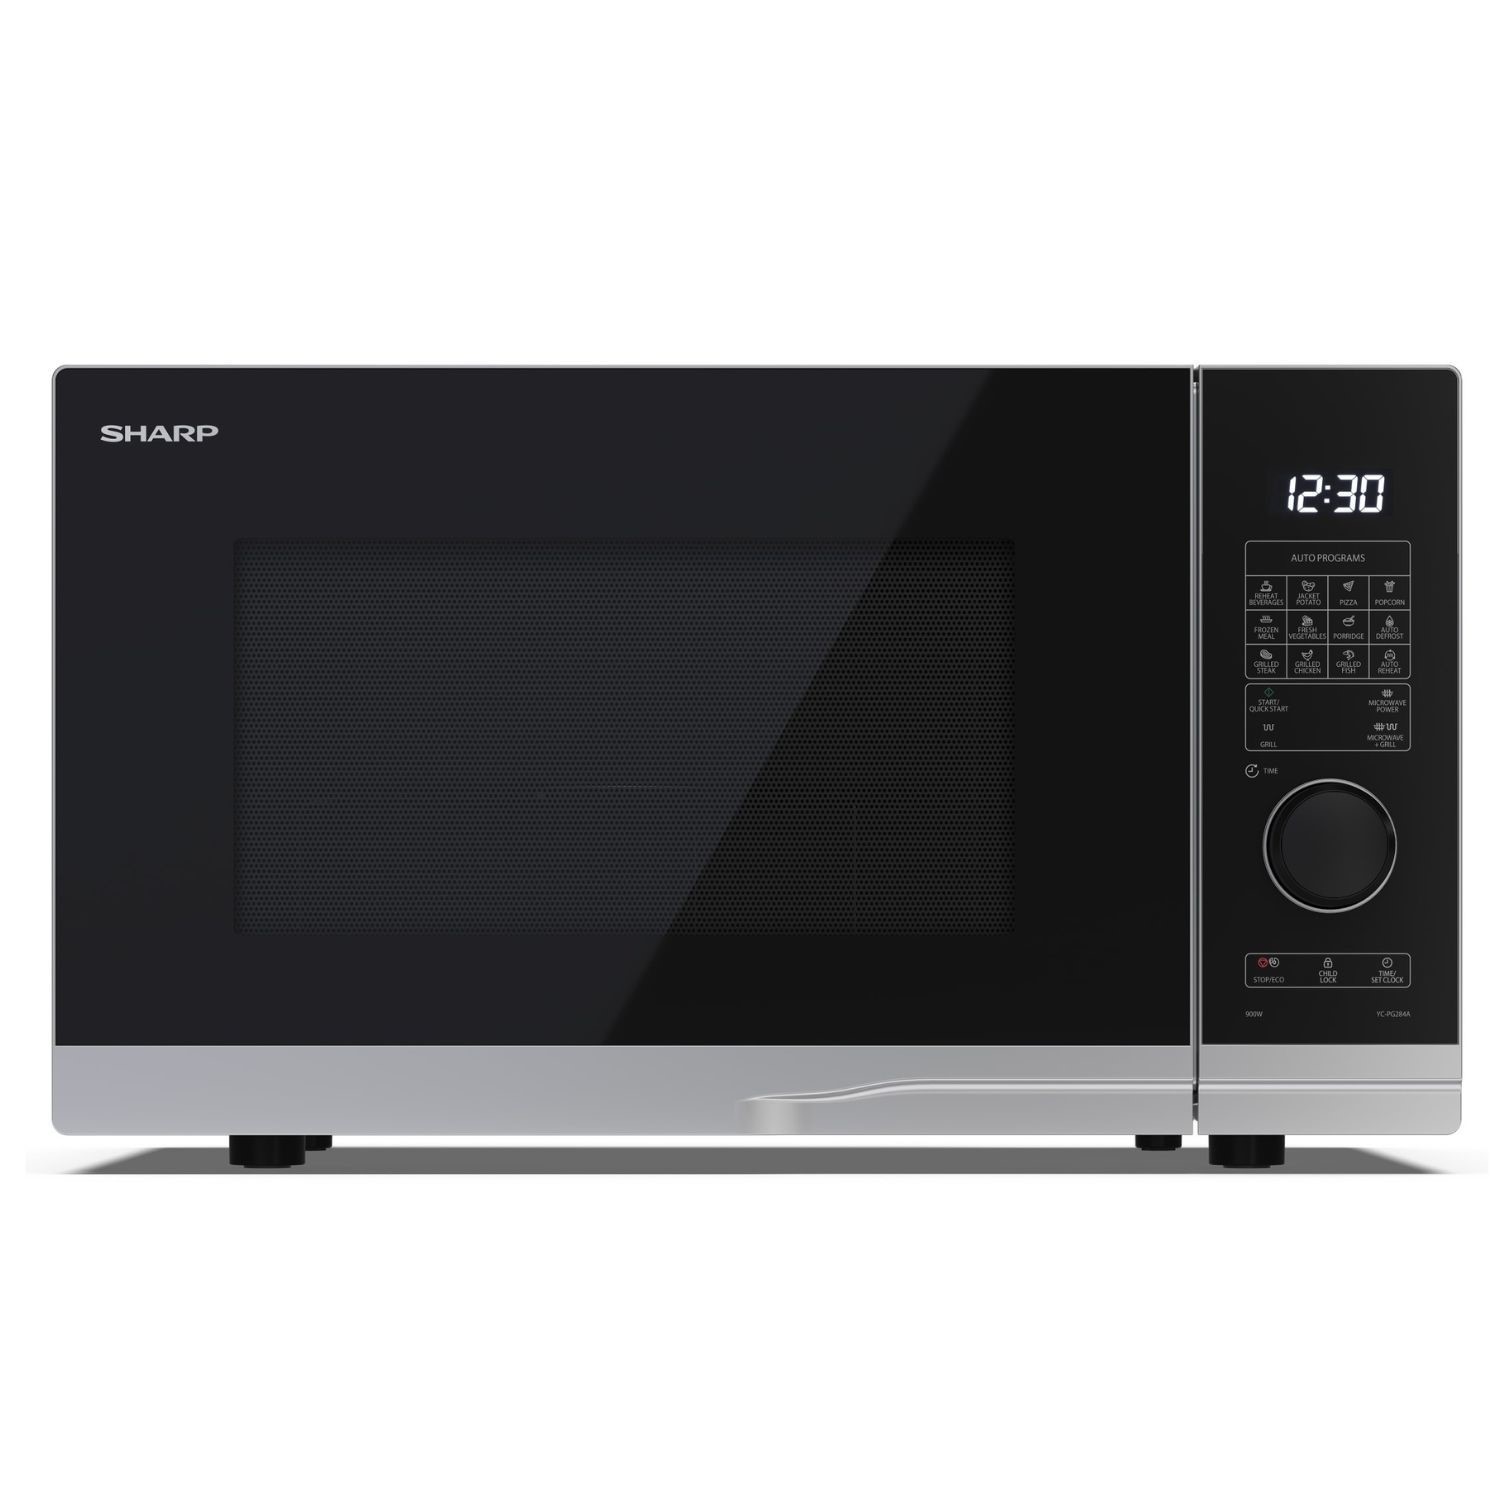 Photos - Other for Computer Sharp 28L 900W Digital Microwave with Grill - Silver YC-PG284AU-S 